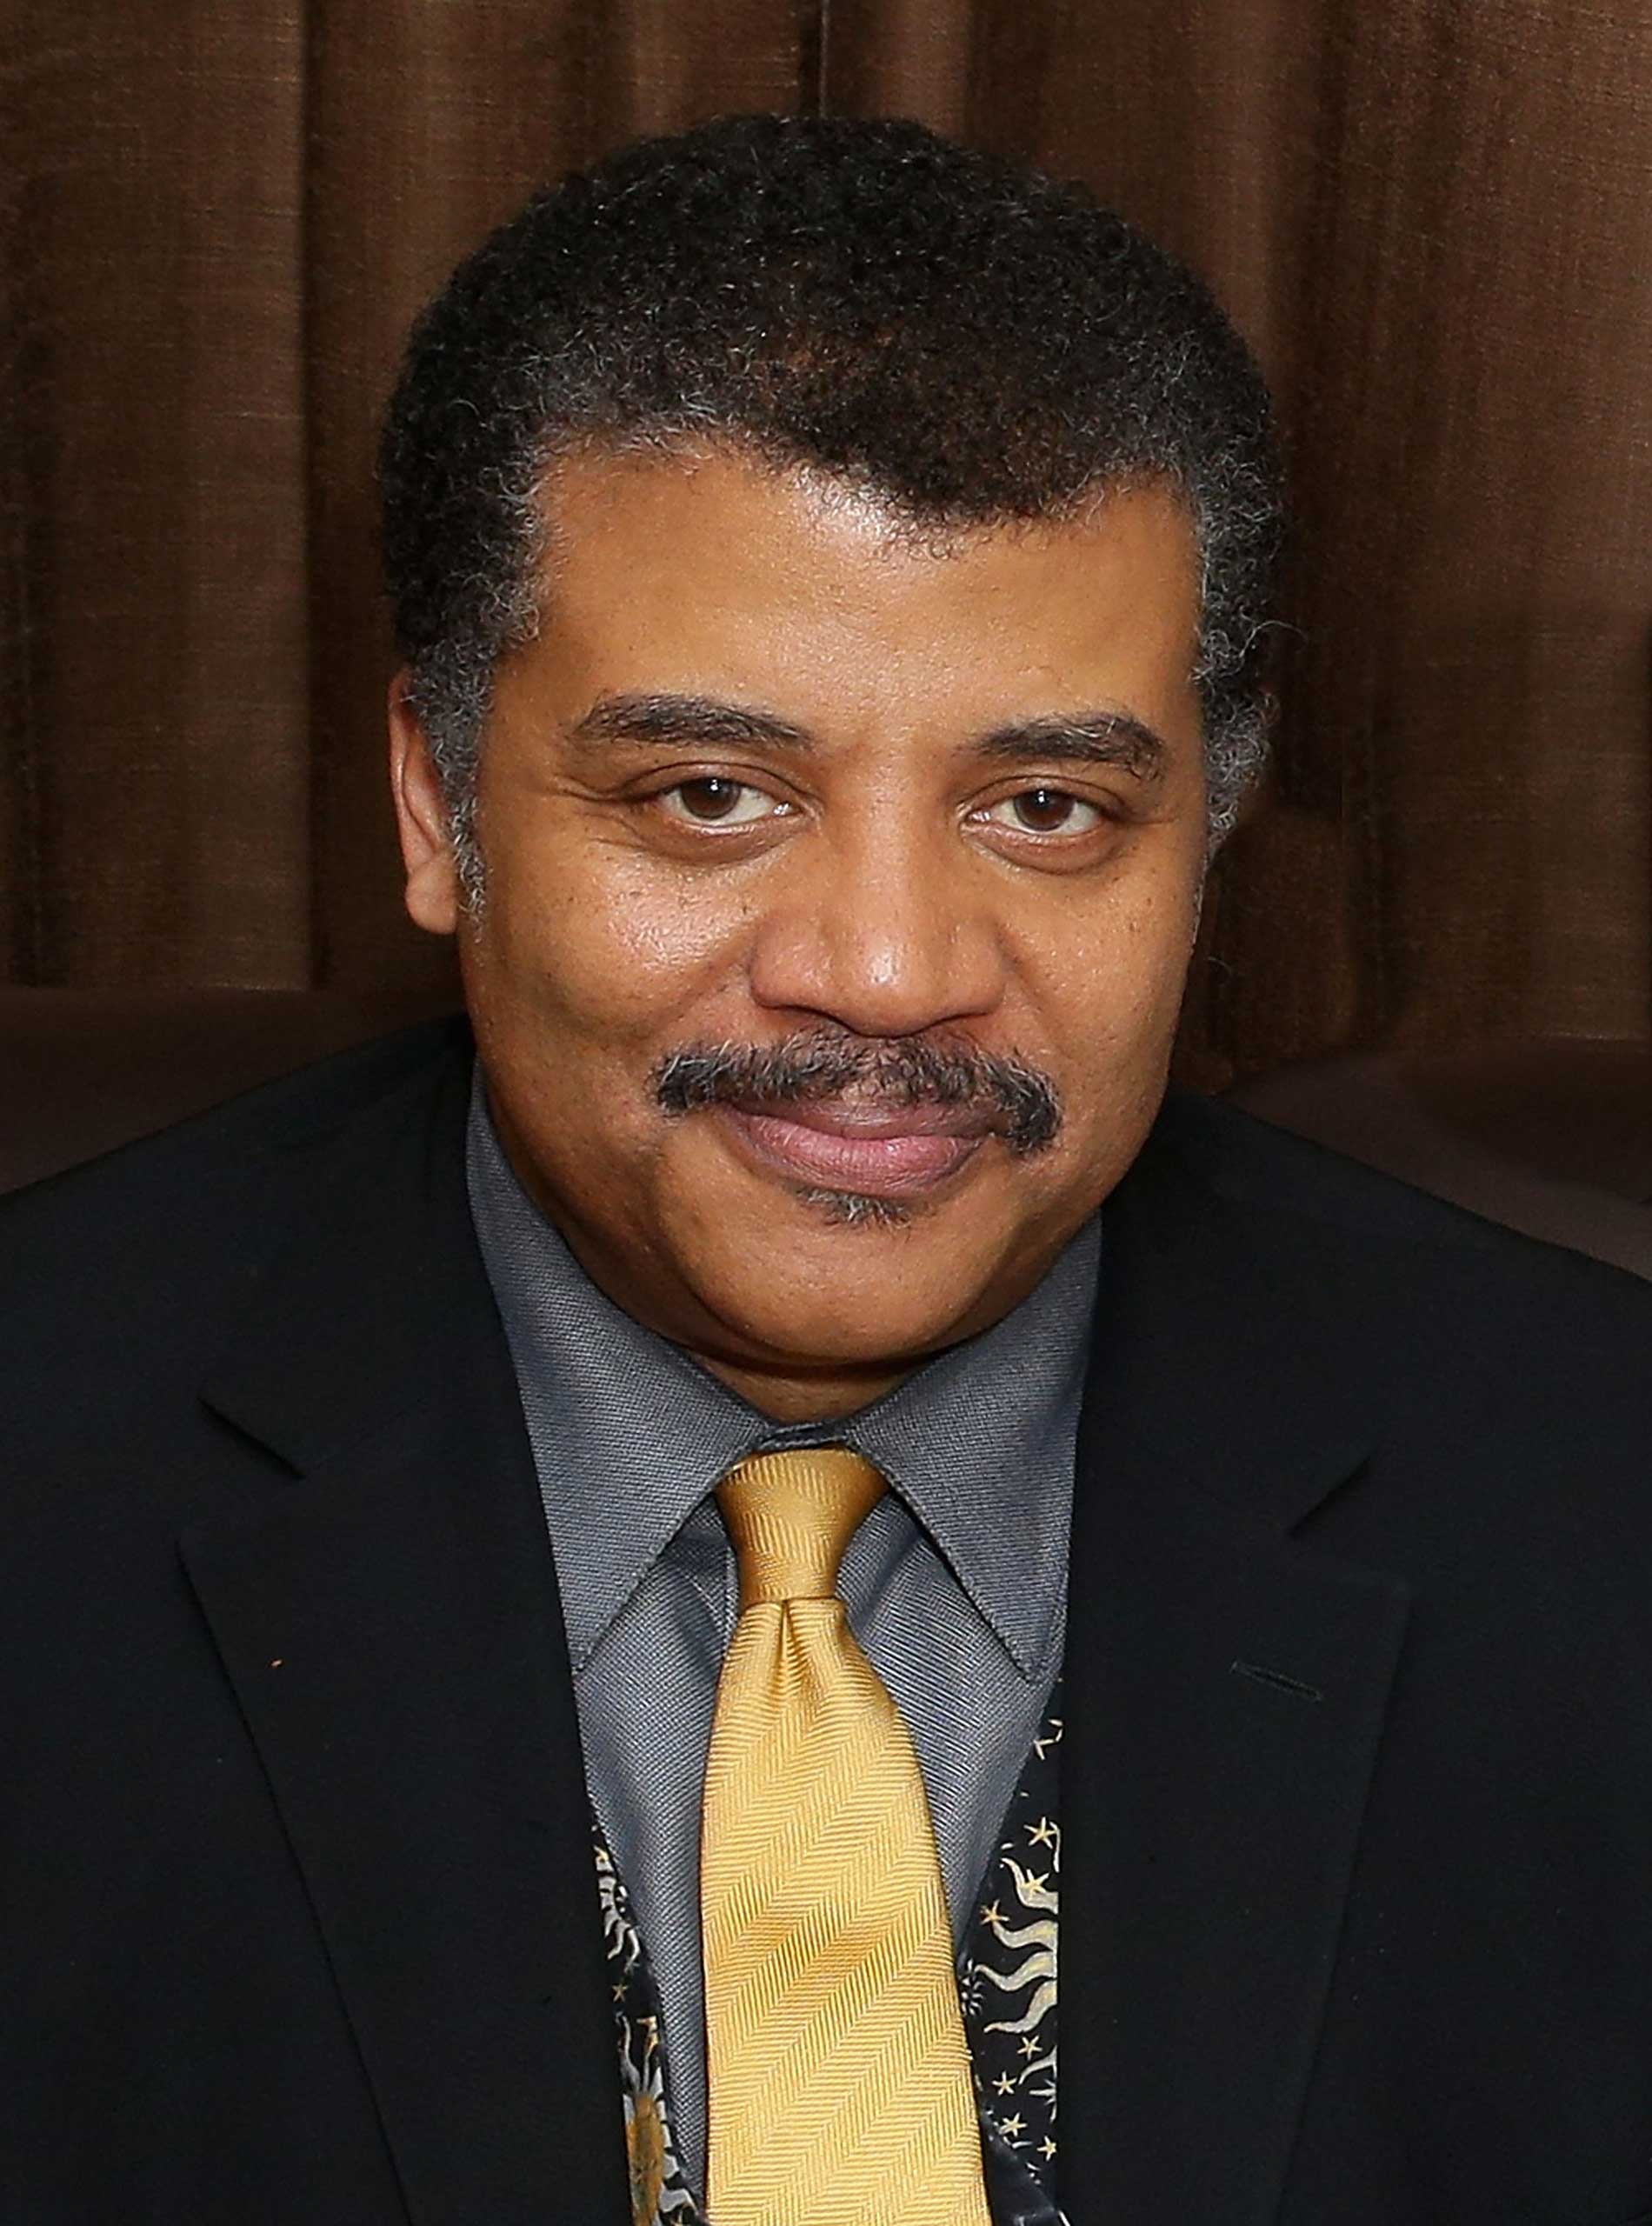 Physicist/TV host Dr. Neil deGrasse Tyson in New York City, June 5, 2014. (Andrew Toth—Getty Images)